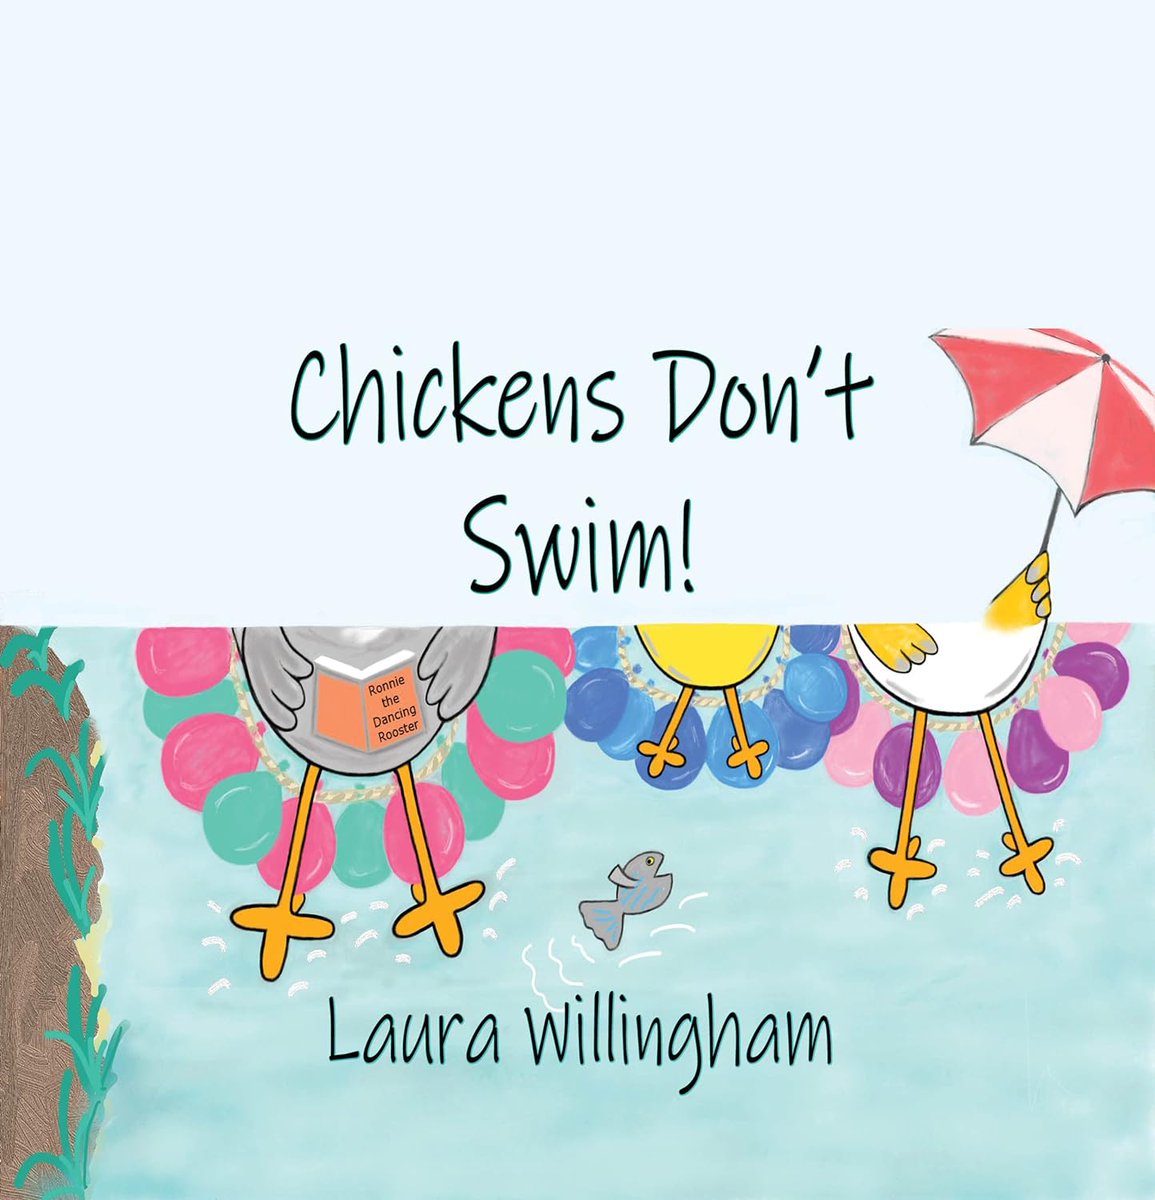 DL if you like our #ChildrensEbook #ChildrensFiction #KidsLit #kindle #FreeBook! 'Chickens Don't Swim!' by Laura Willingham  @freebookshub  ow.ly/gQXv50QjuWs